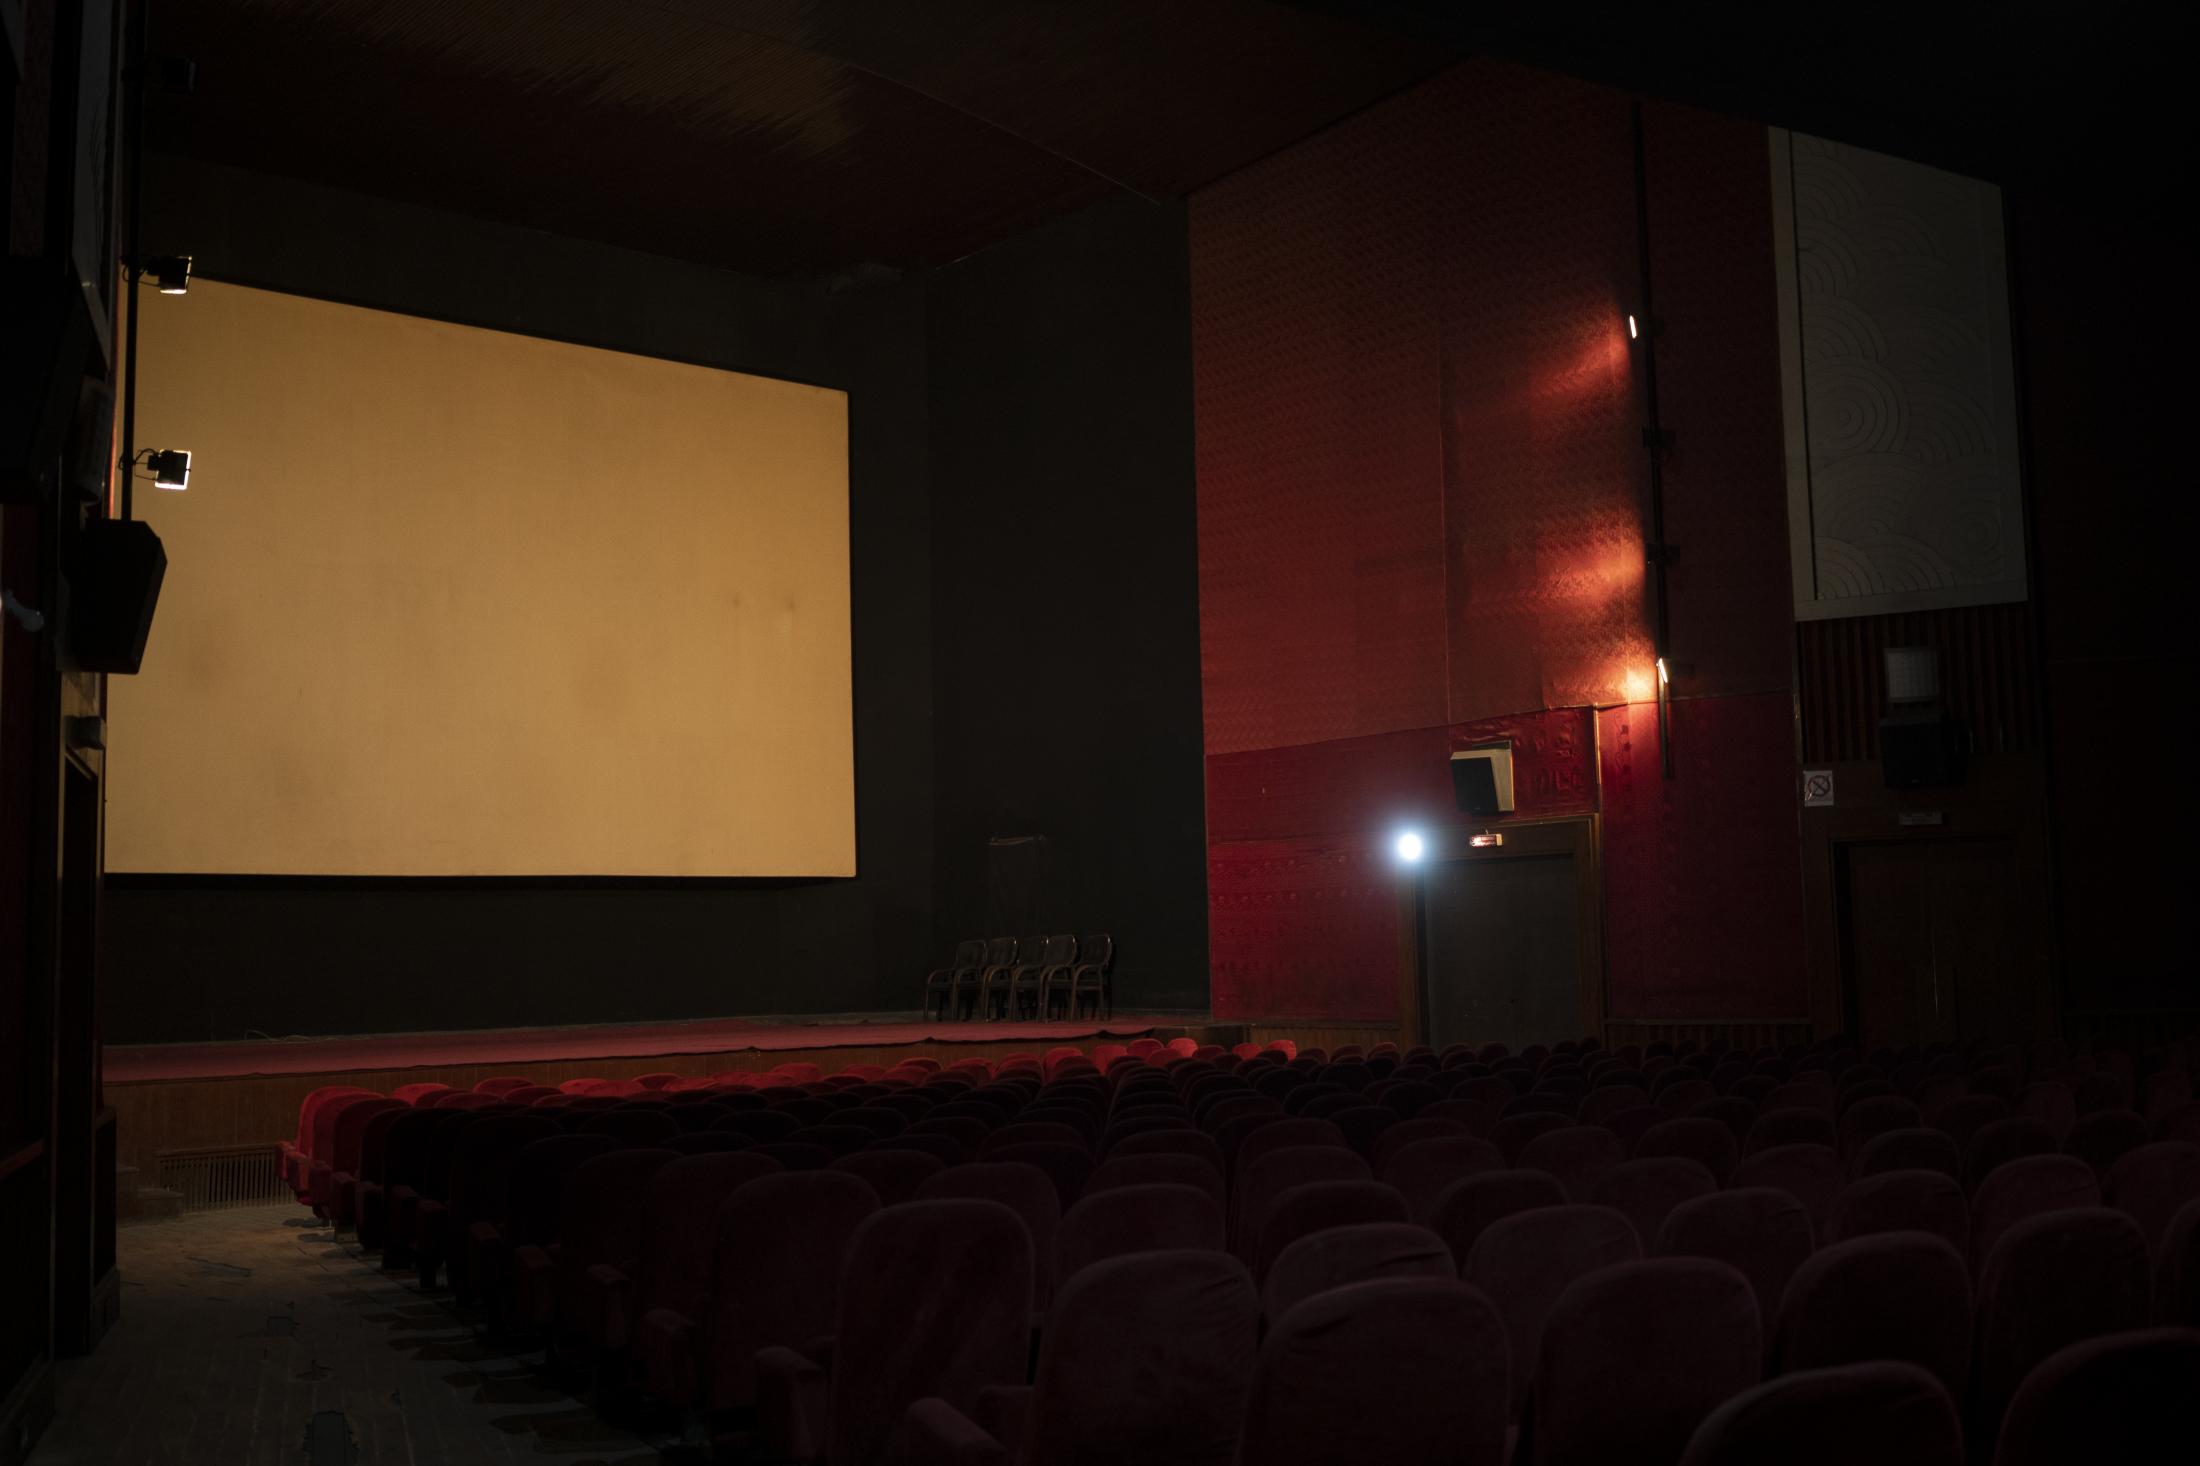 The Cinema of Kabul - The empty theater of the Ariana Cinema in Kabul,...